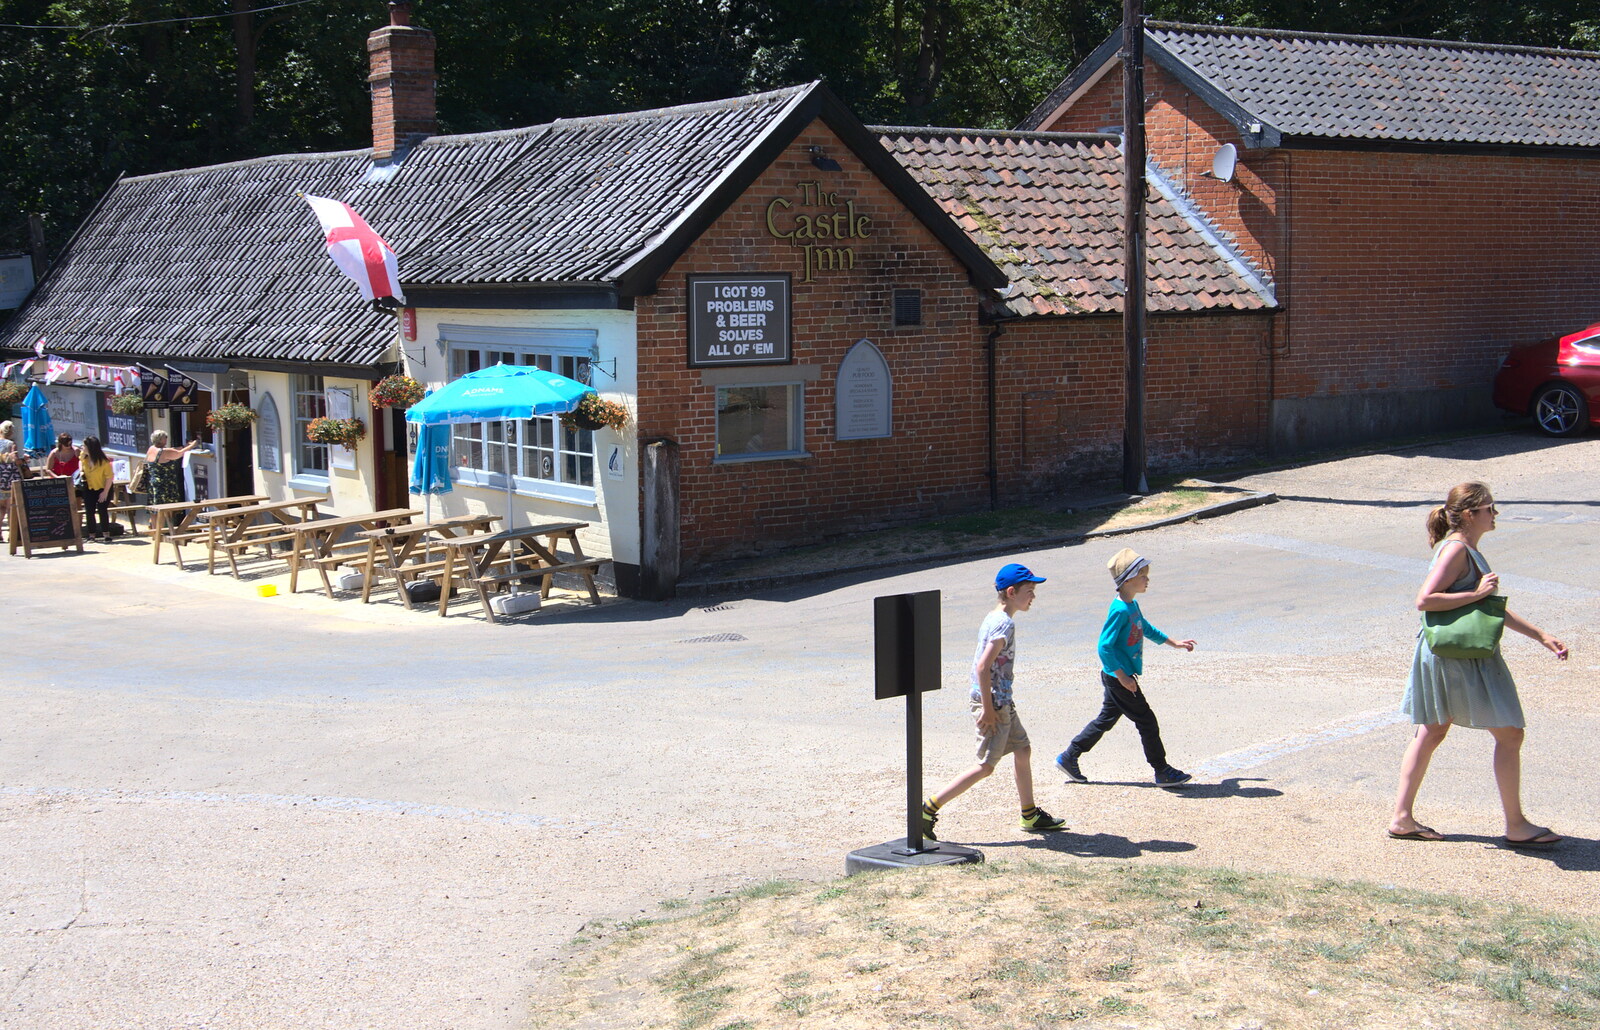 We head off past the Castle Inn pub from A Postcard from the Castle on the Hill, Framlingham, Suffolk - 14th July 2018